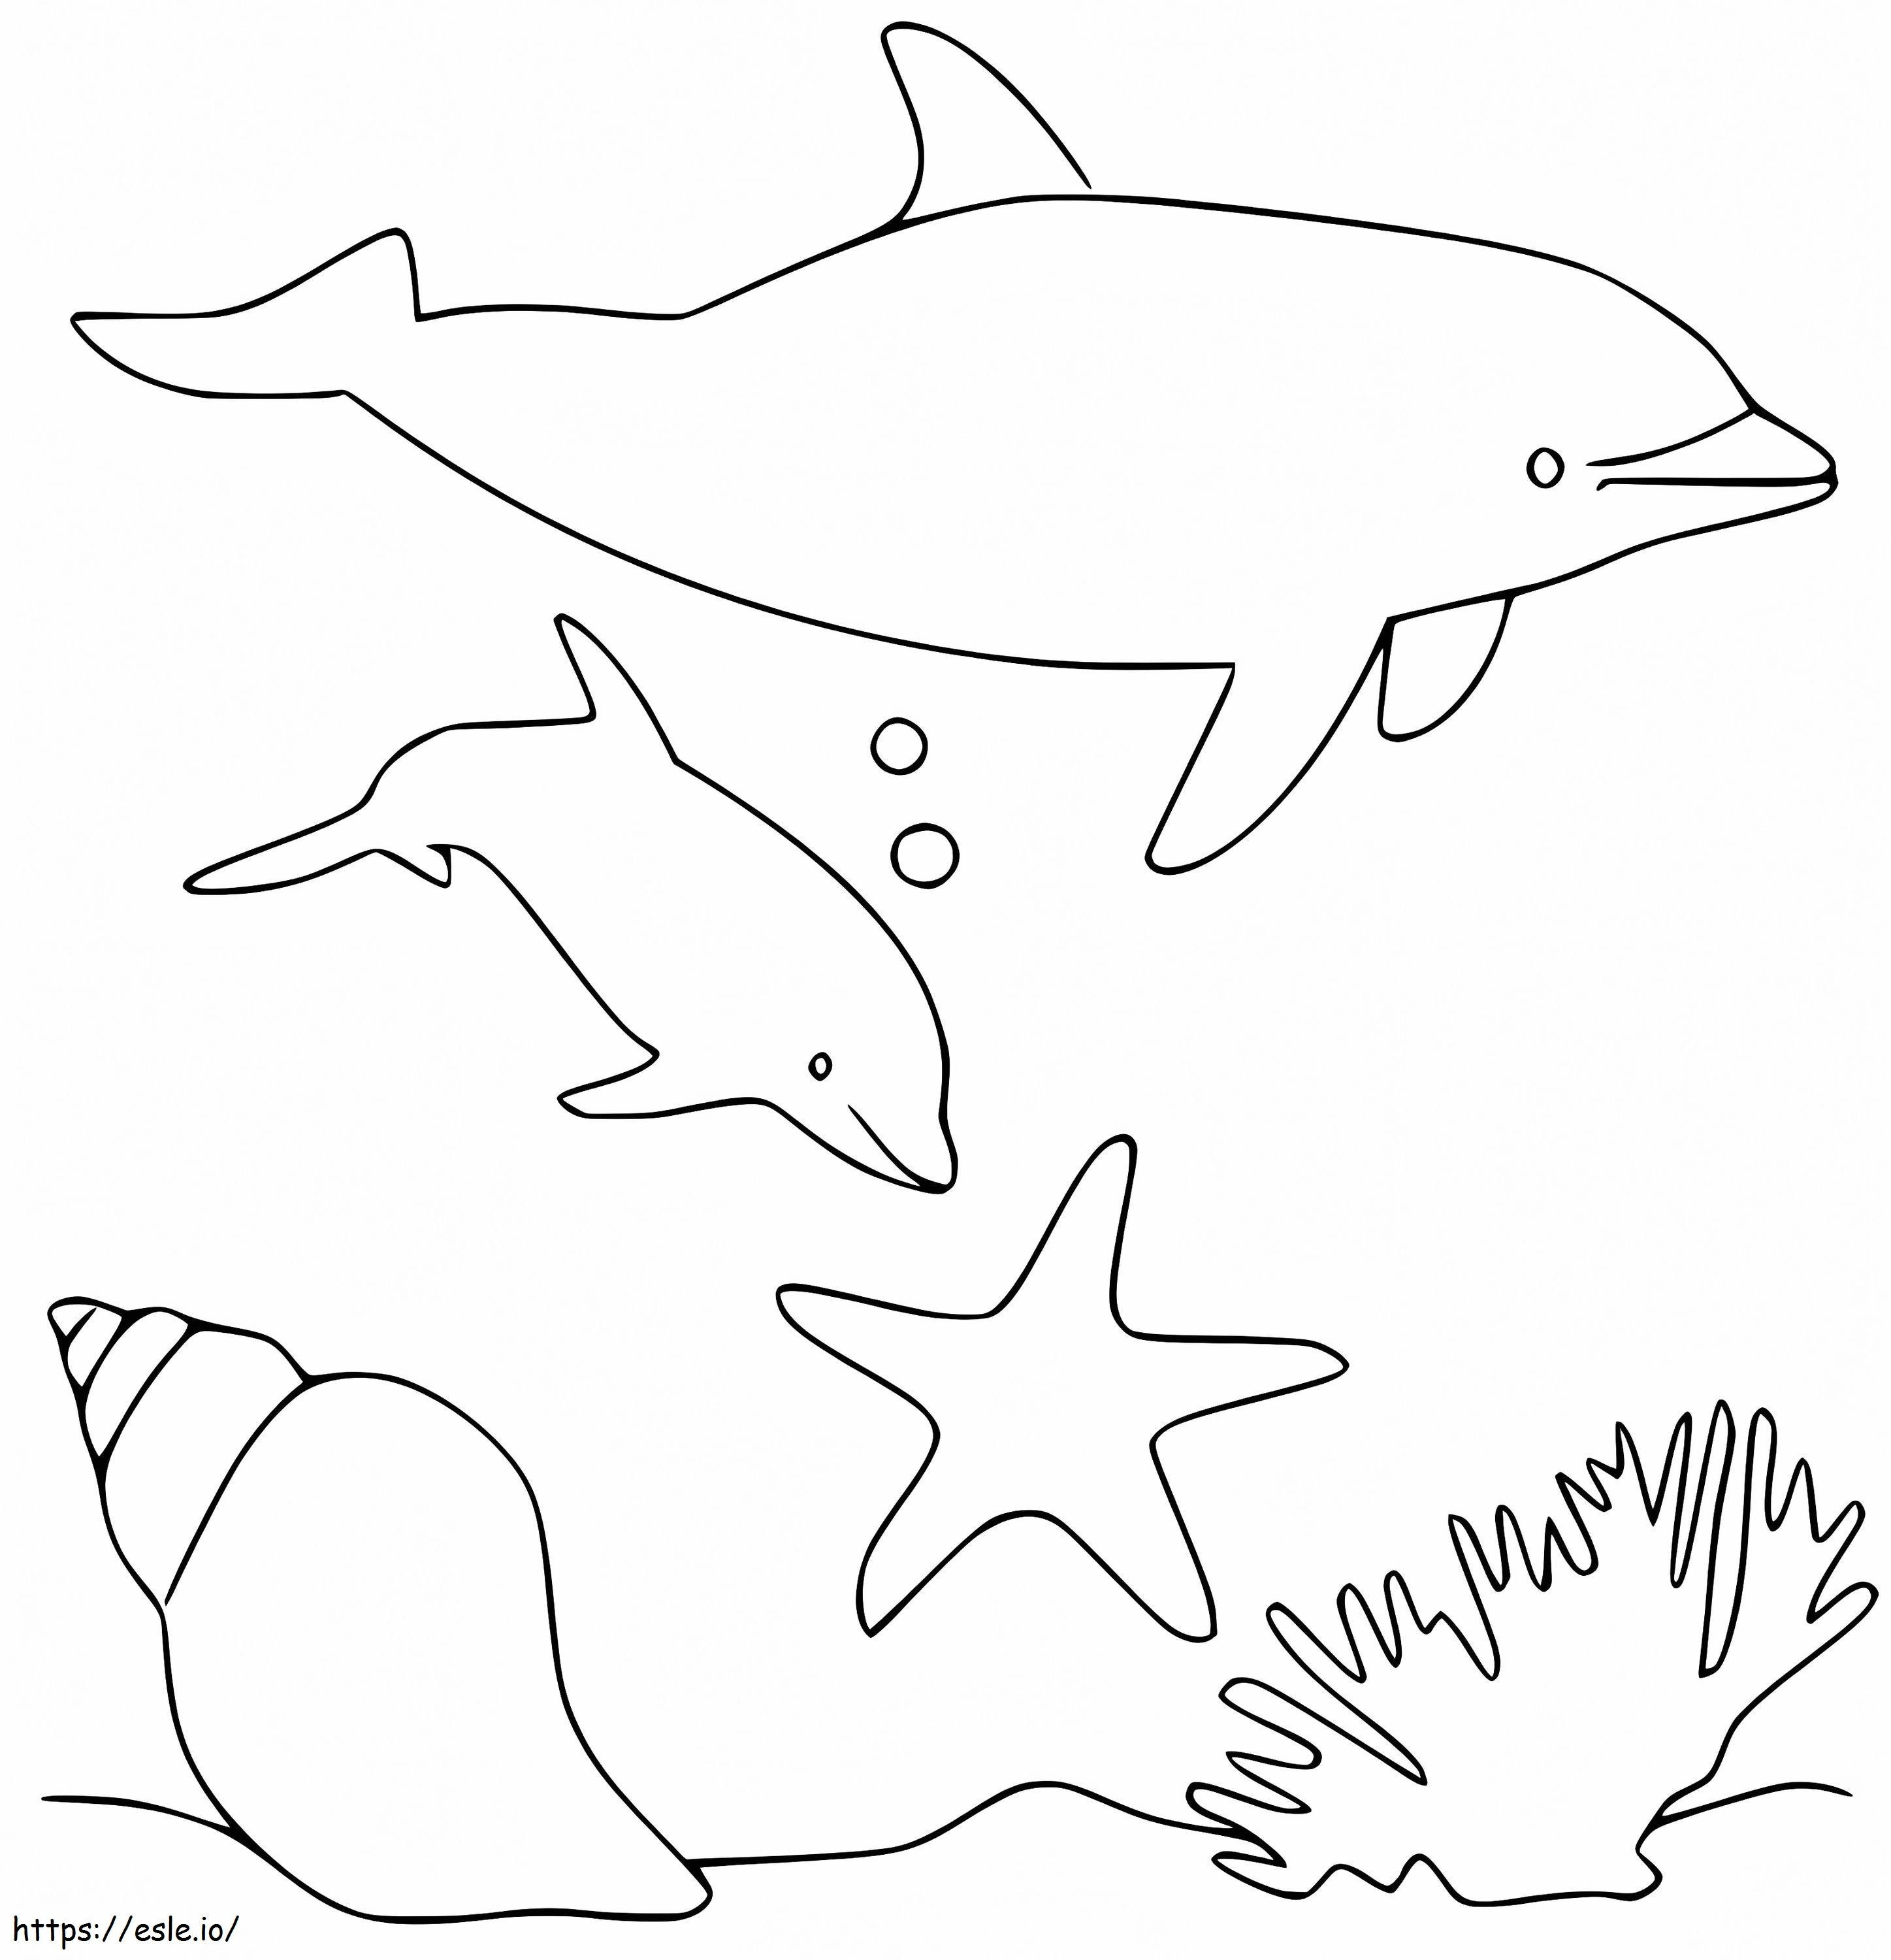 Porpoises coloring page